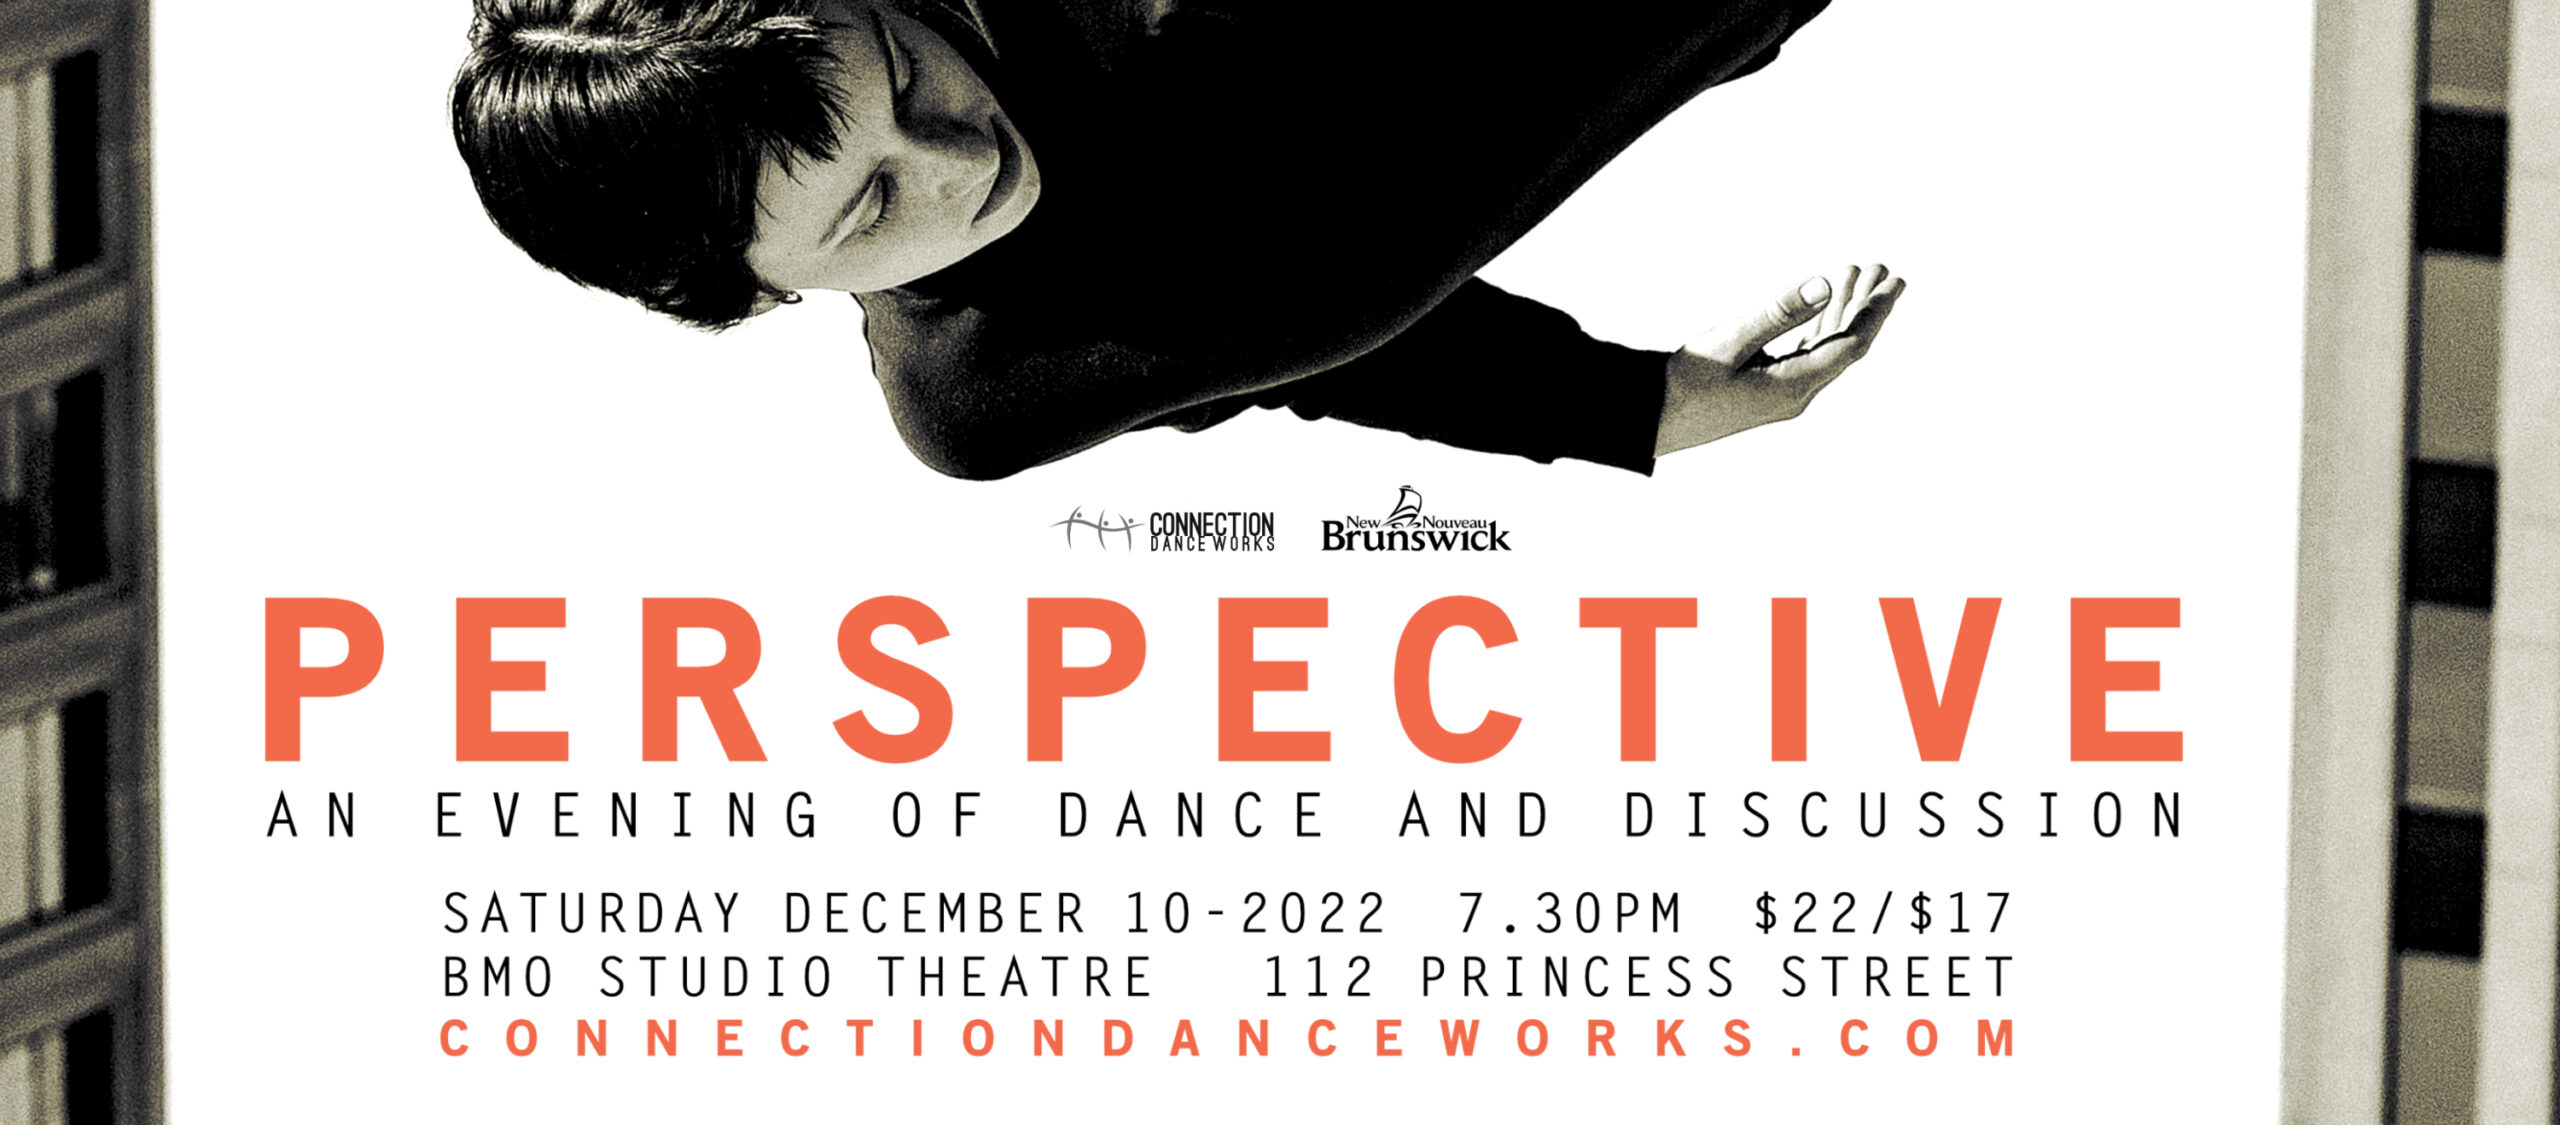 Image of a dancer. Text reads: Perspective: An Evening of Dance and Discussion. Saturday, December 10, 2022. 7:30pm $22/$17, BMO Studio Theatre, 112 Princess Street. ConnectionDanceWorks.com